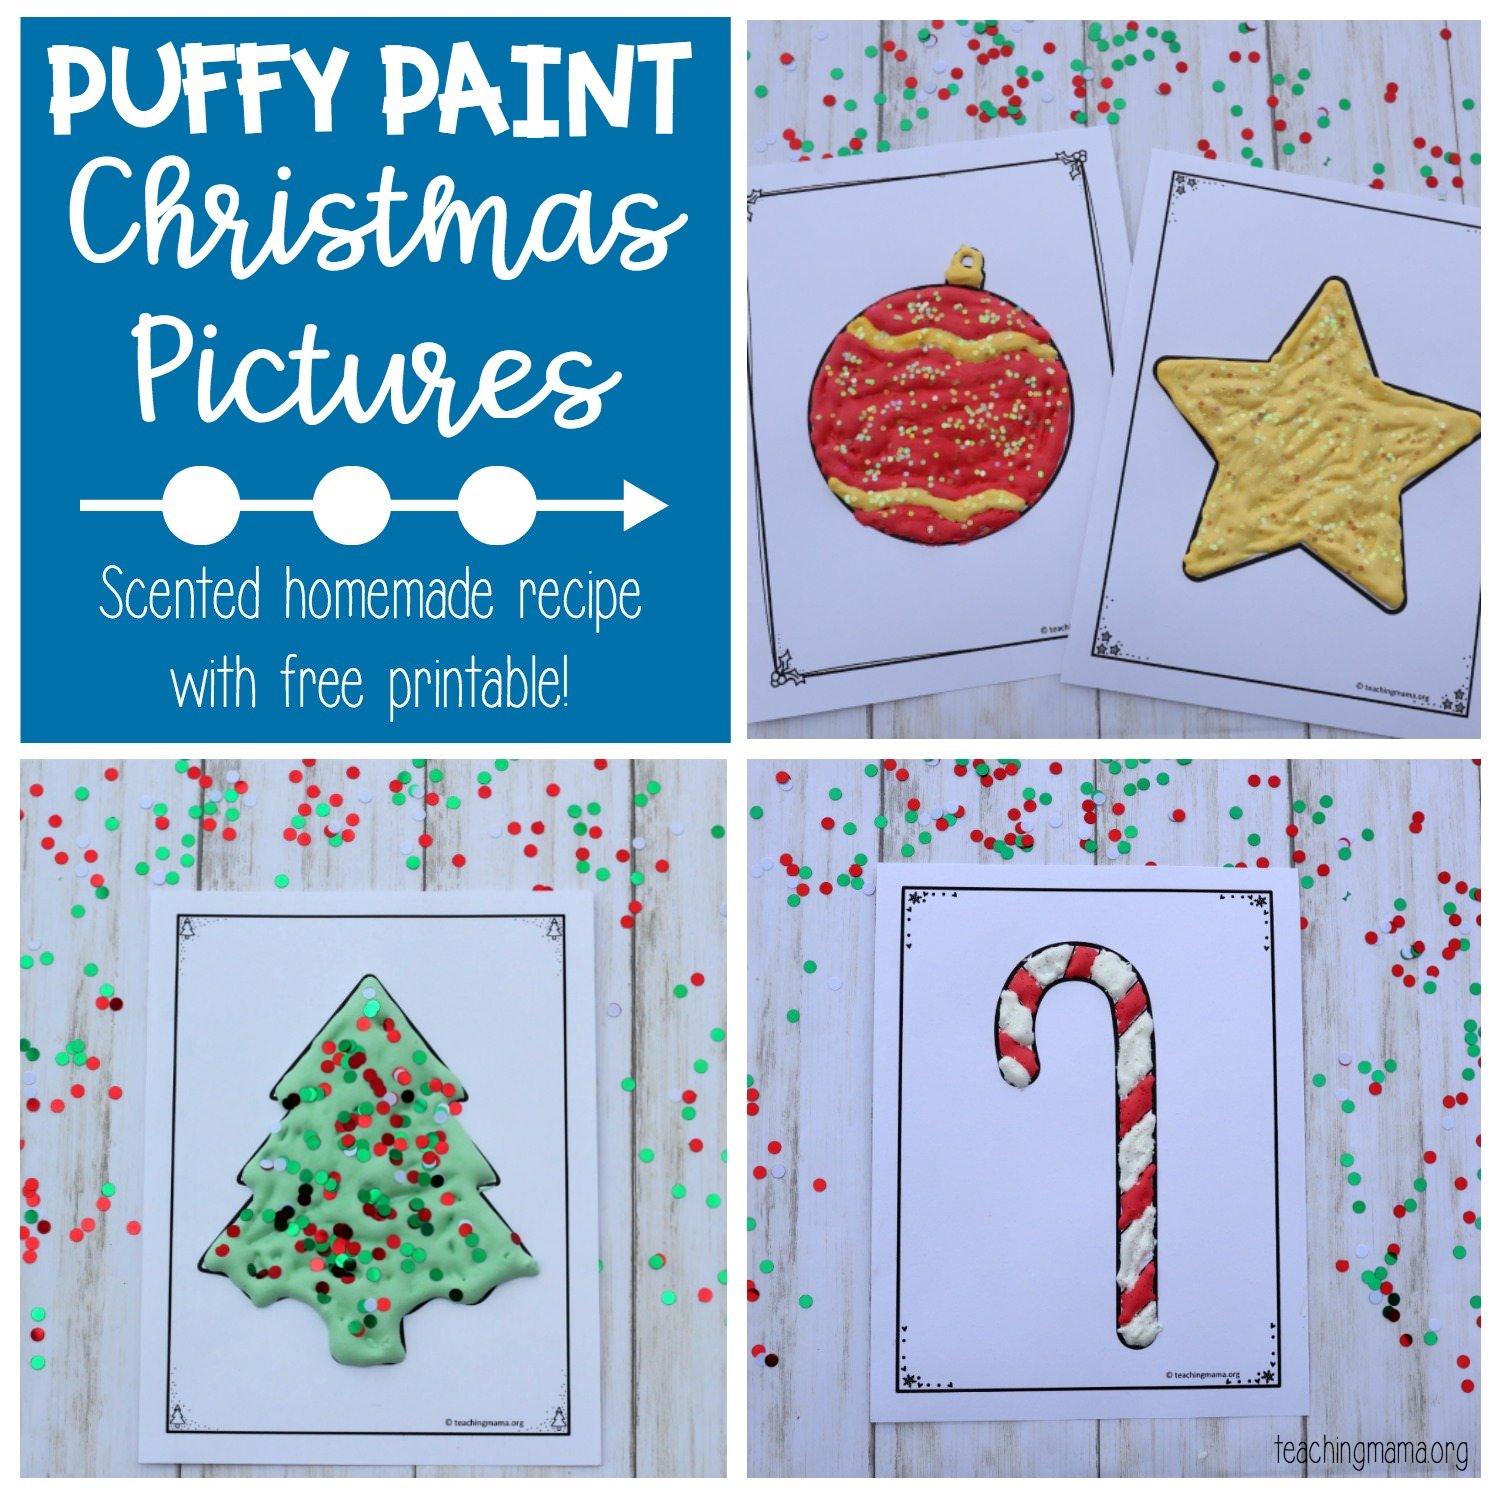 Puffy Paint Christmas Pictures